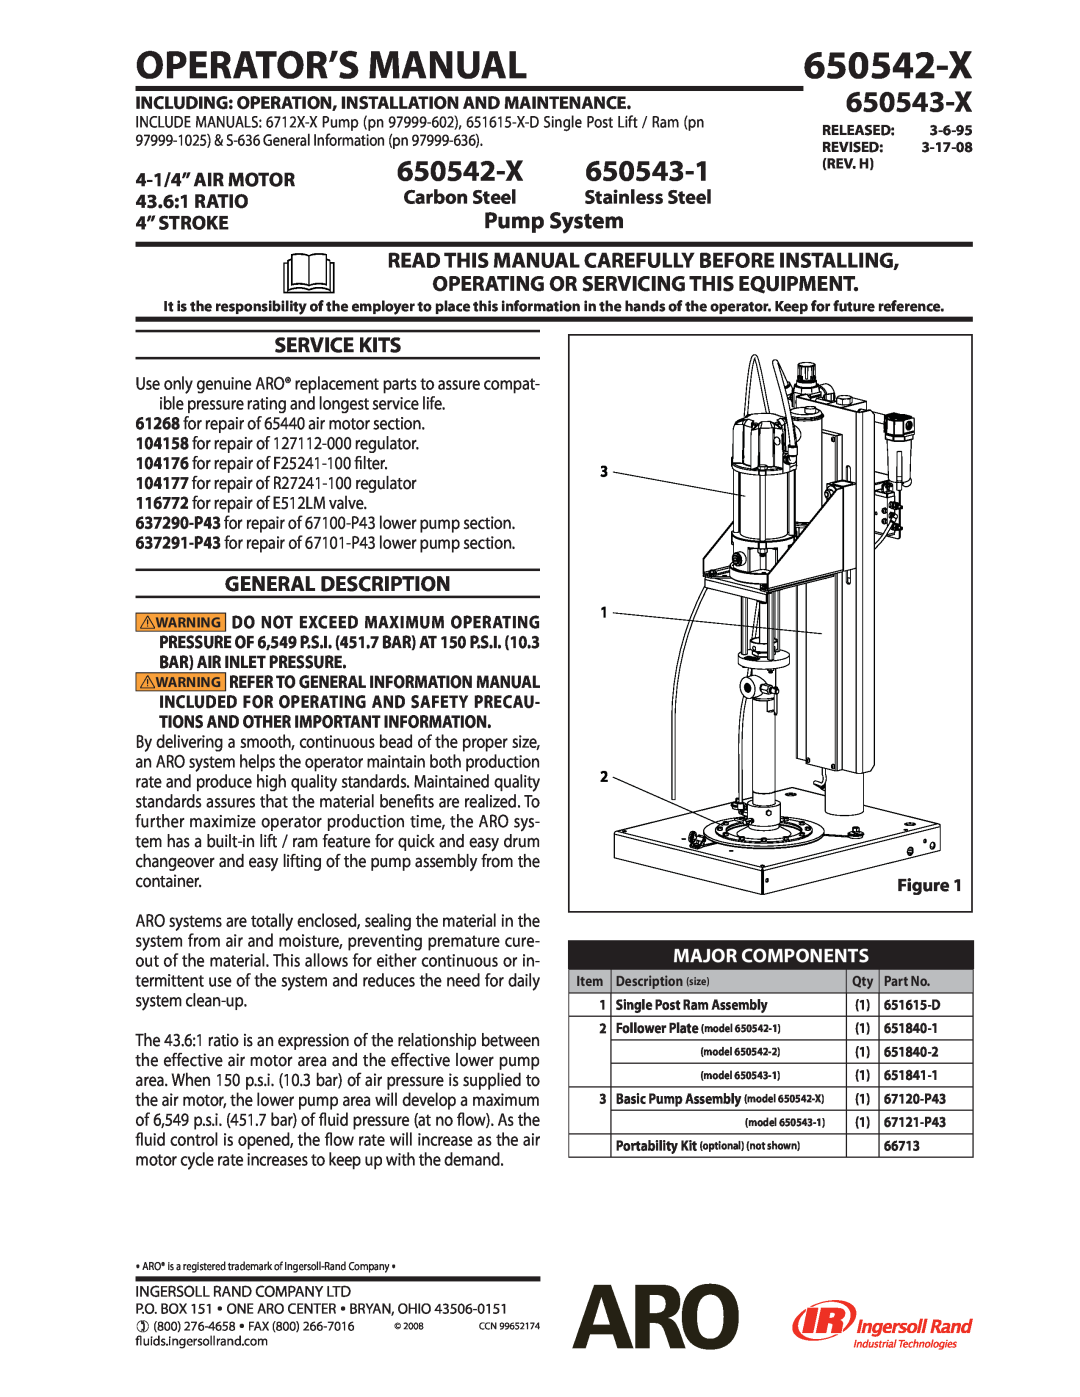 Ingersoll-Rand 650542-1 general information manual Read This Manual Carefully Before Installing, Service Kits, 650542-X 